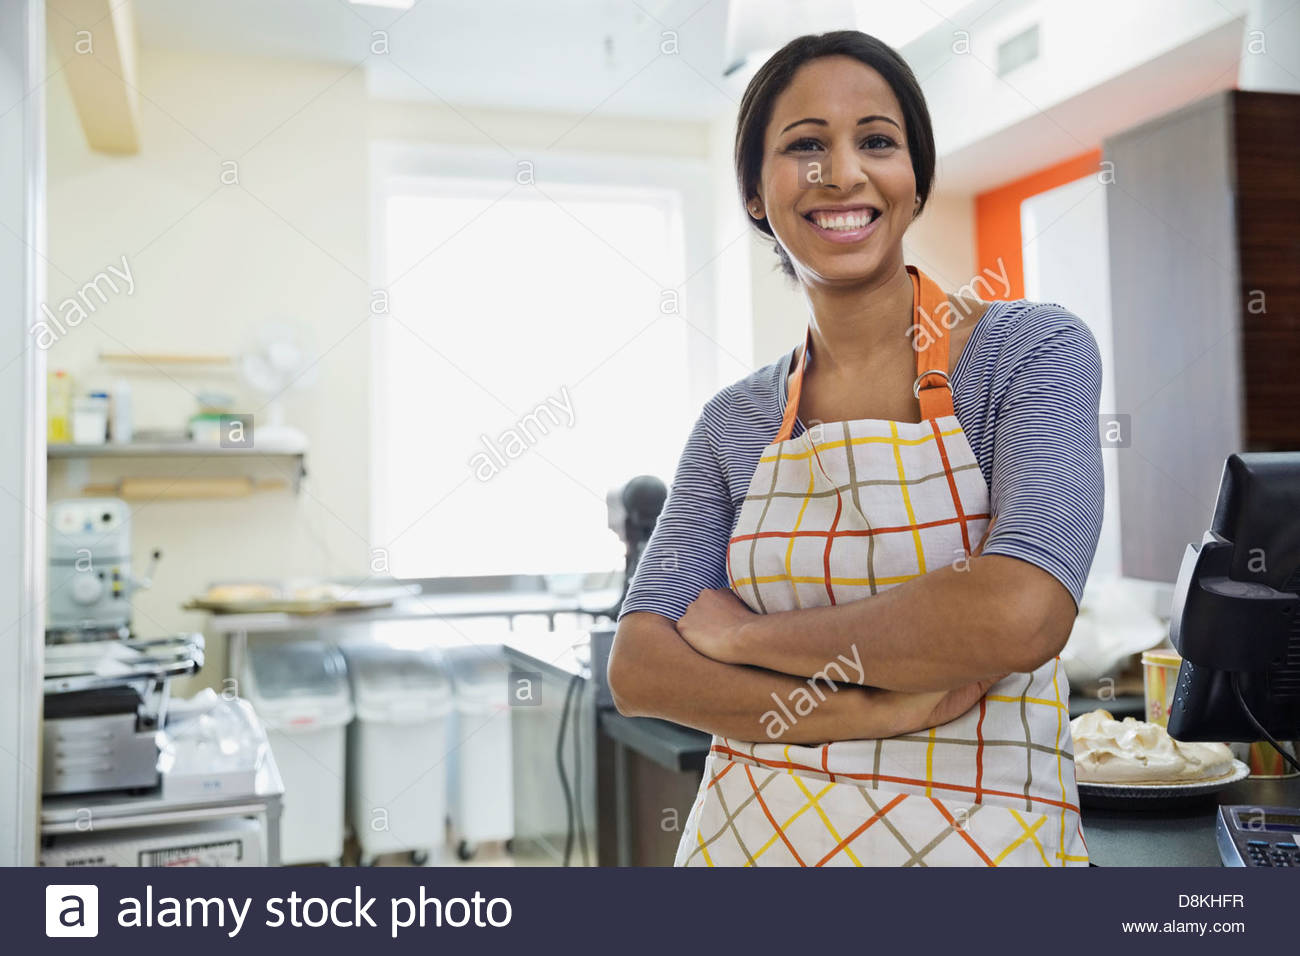 Portrait of smiling woman baker standing in bakery Stock Photo